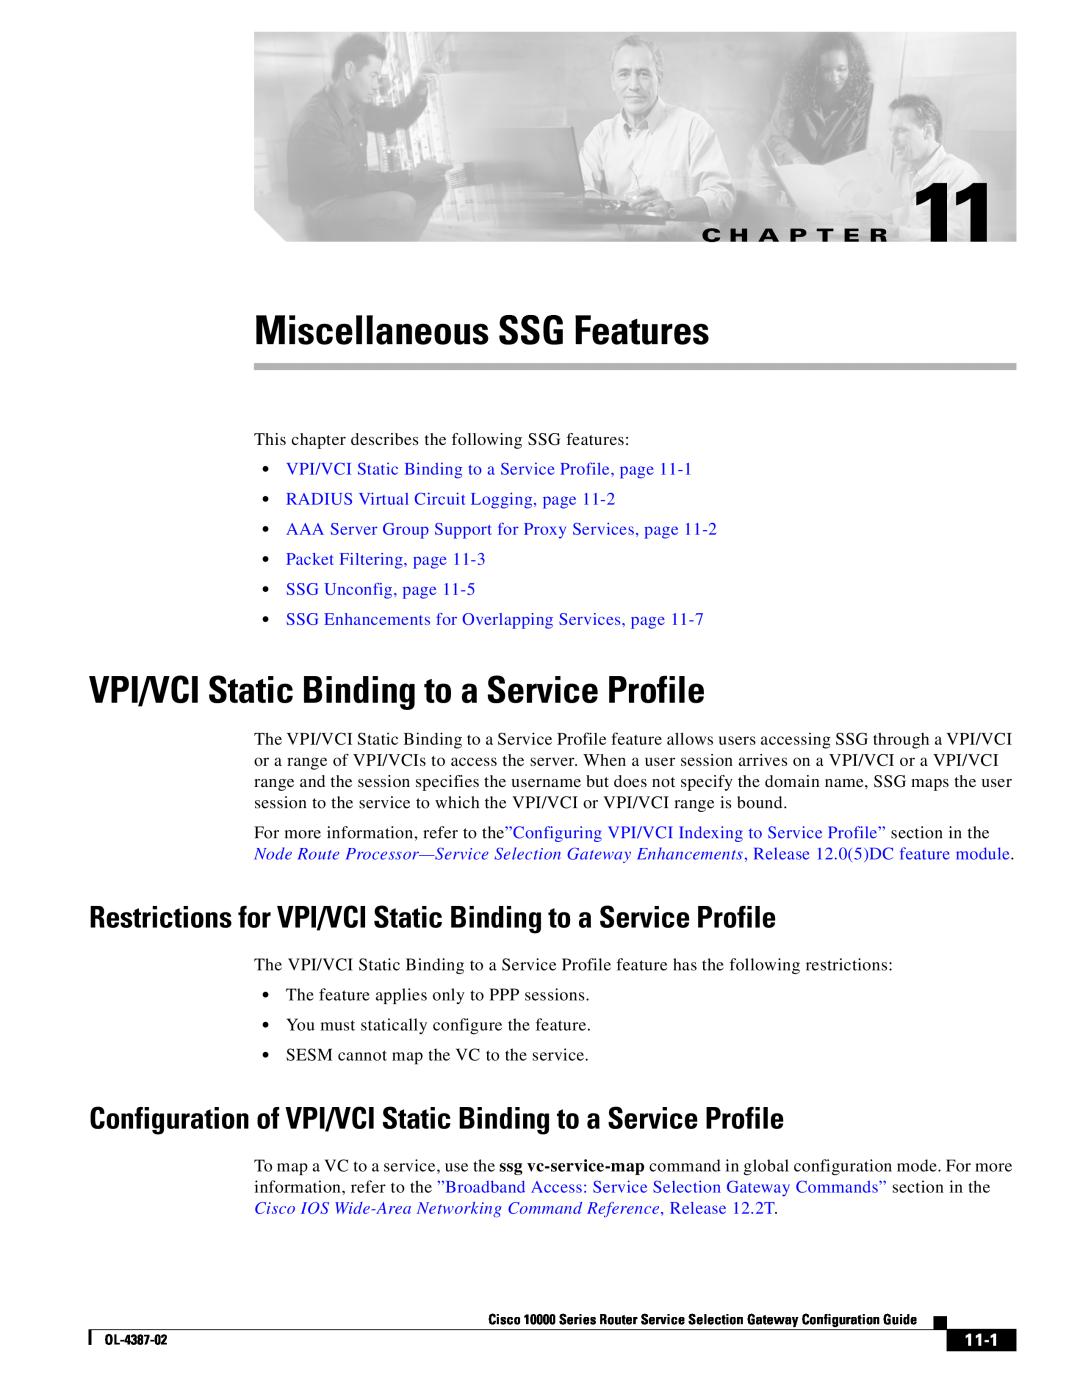 Cisco Systems OL-4387-02 Miscellaneous SSG Features, VPI/VCI Static Binding to a Service Profile, 11-1, C H A P T E R 